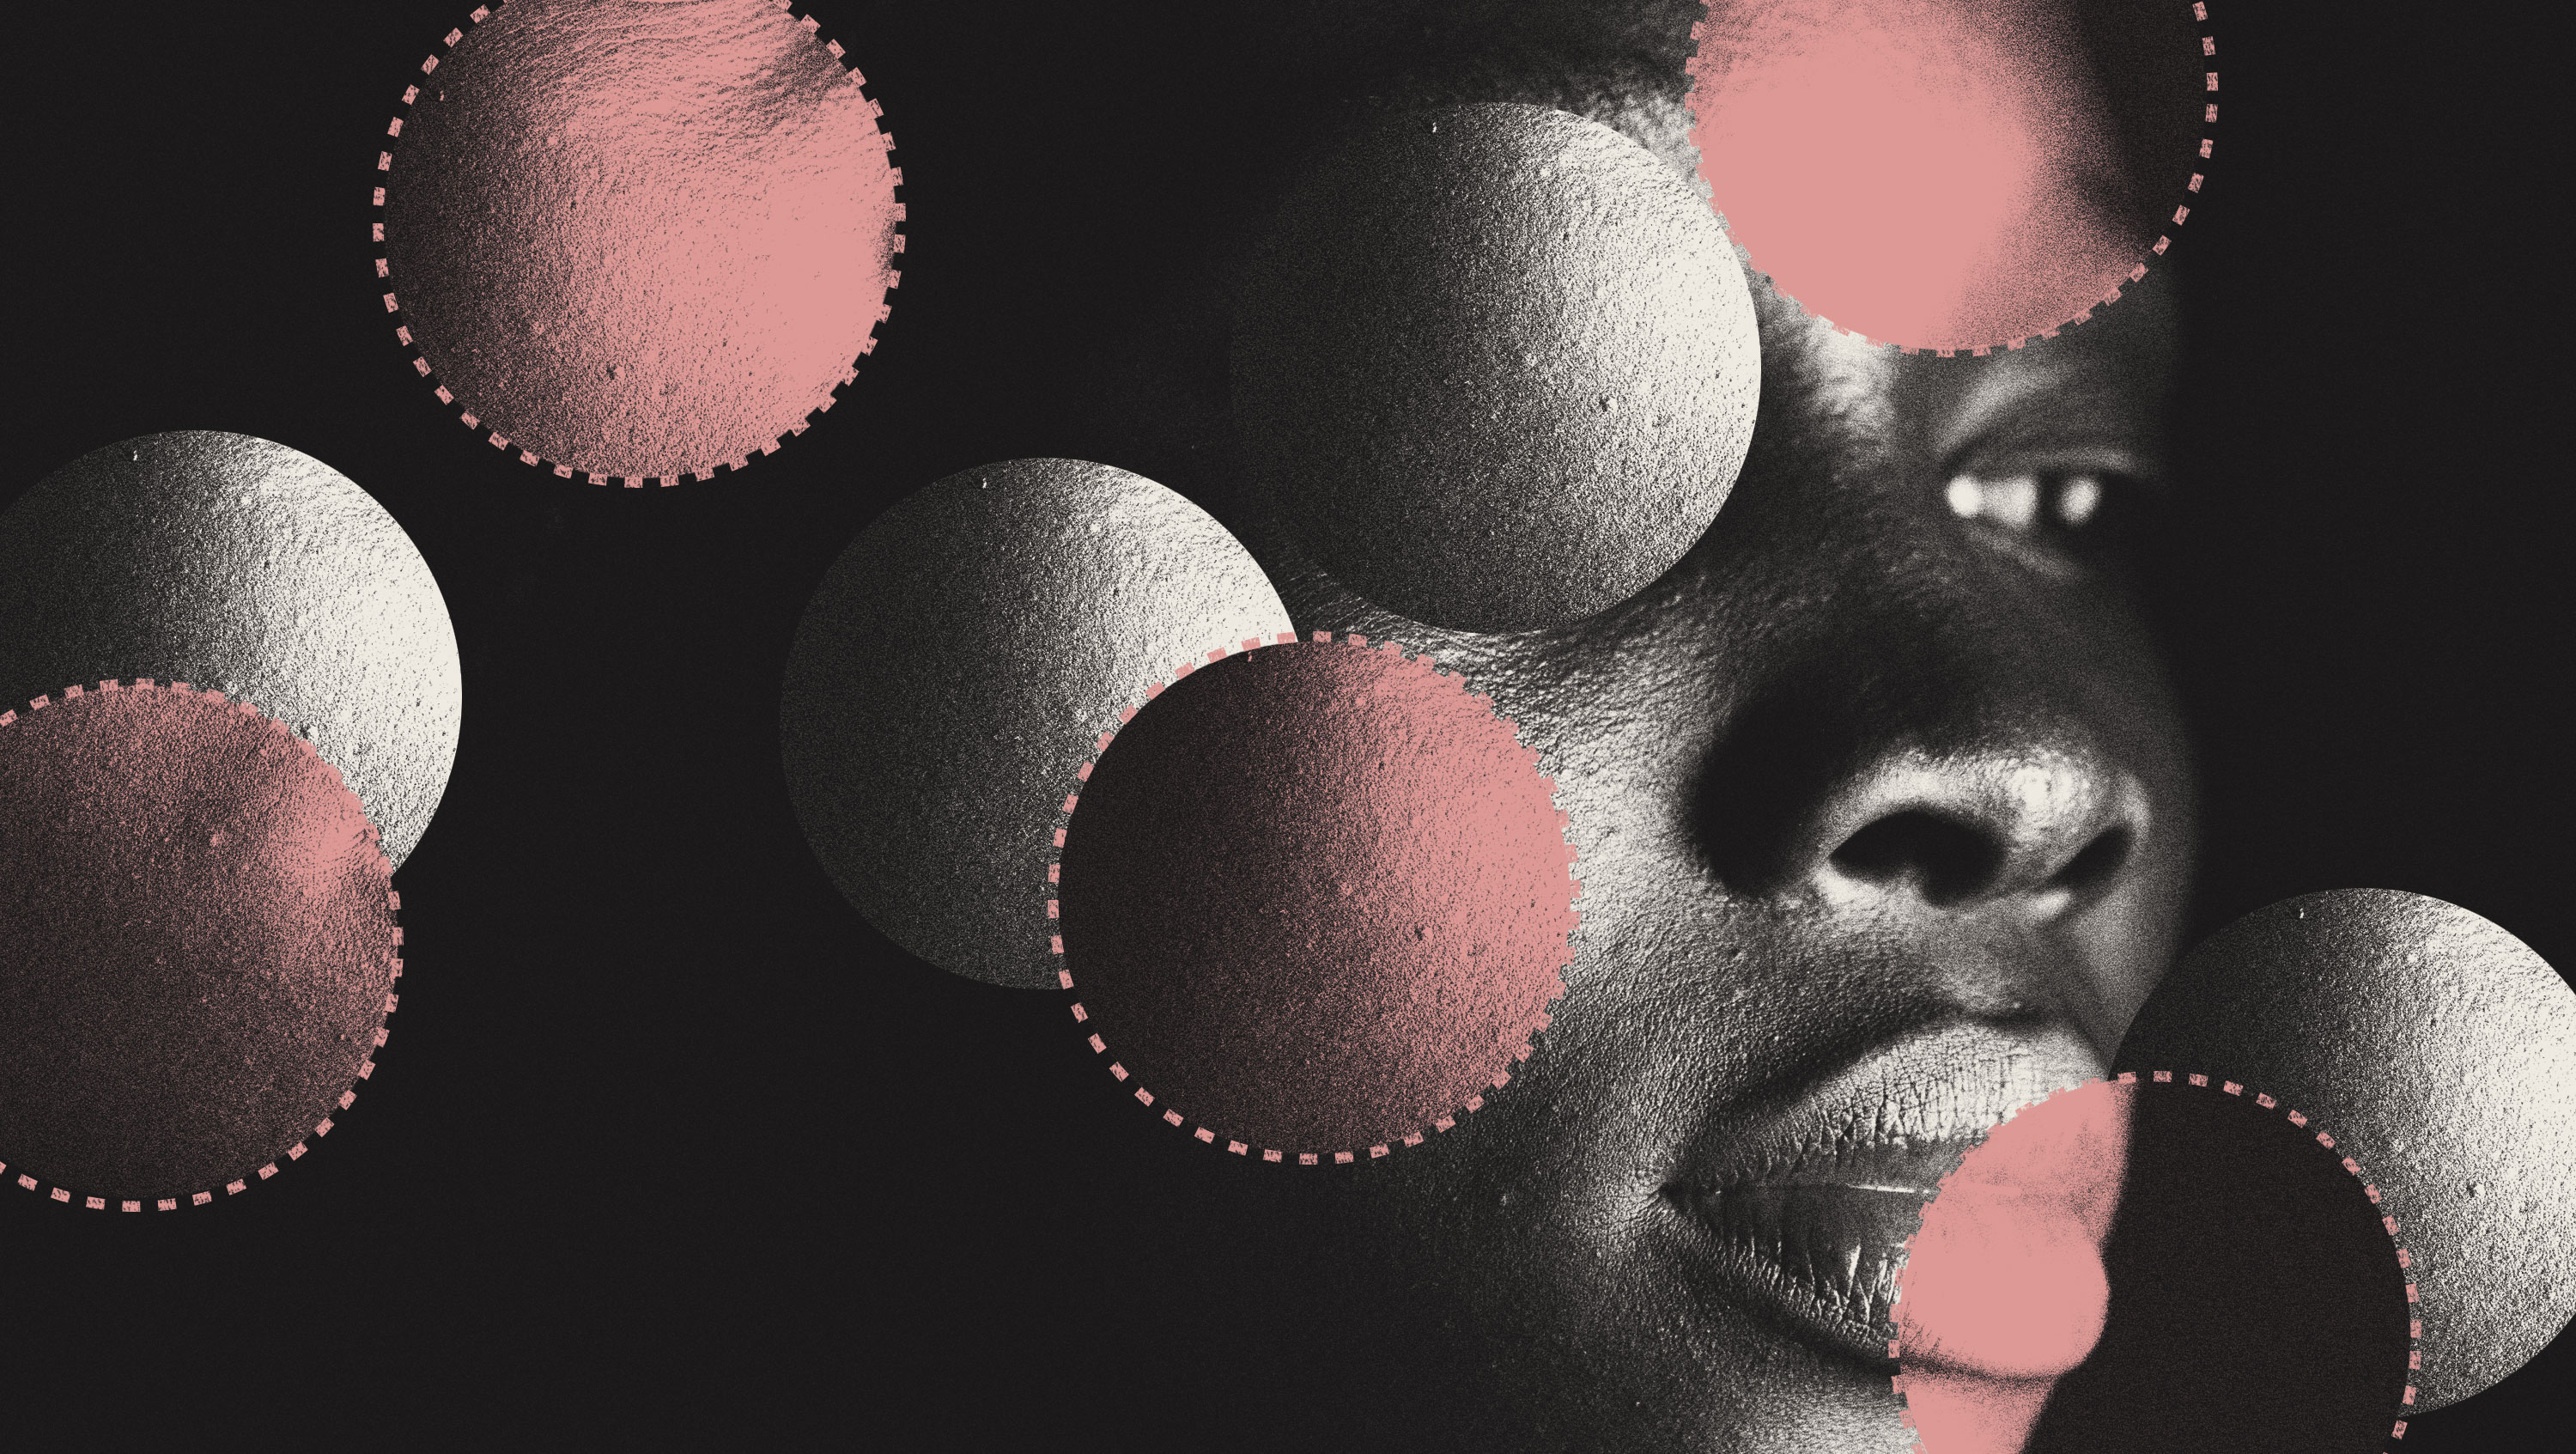 Conceptual illustration of a young black woman&#039;s face with circles that zoom in on certain features, image is black and white with pink highlights